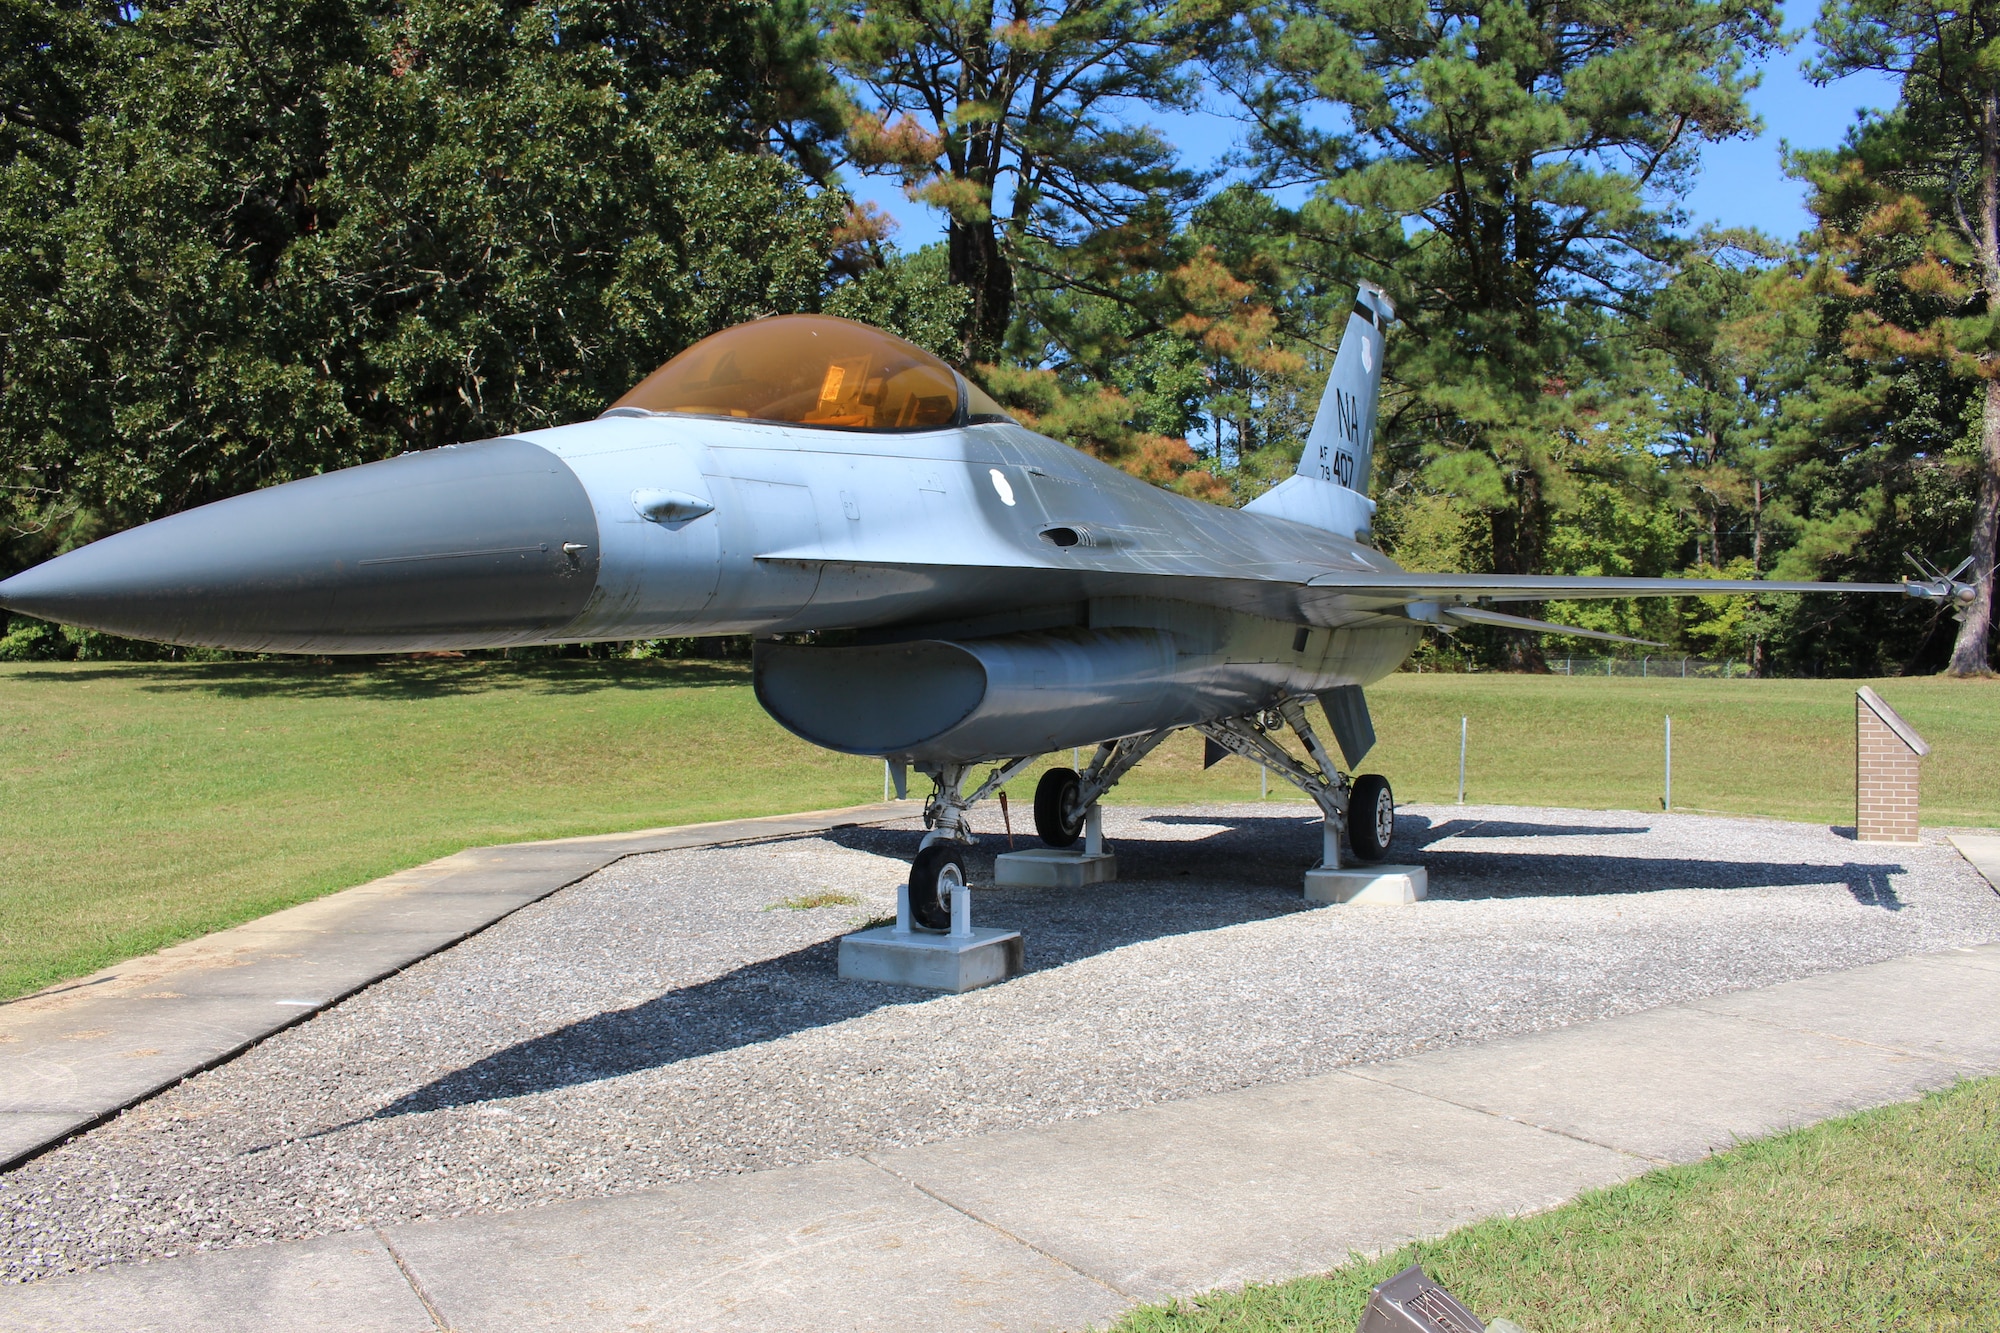 The static F-16 Fighting Falcon on display outside Gate 2 at Arnold Air Force Base, Tenn., is dedicated to Maj. Gen. Winfield Harpe. He was killed on Dec. 5, 1988, when the aircraft he was piloting crashed in Madrid, Spain. The display was dedicated in memory of Harpe during a June 26, 2010, ceremony. (U.S. Air Force photo by Kali Bradford)